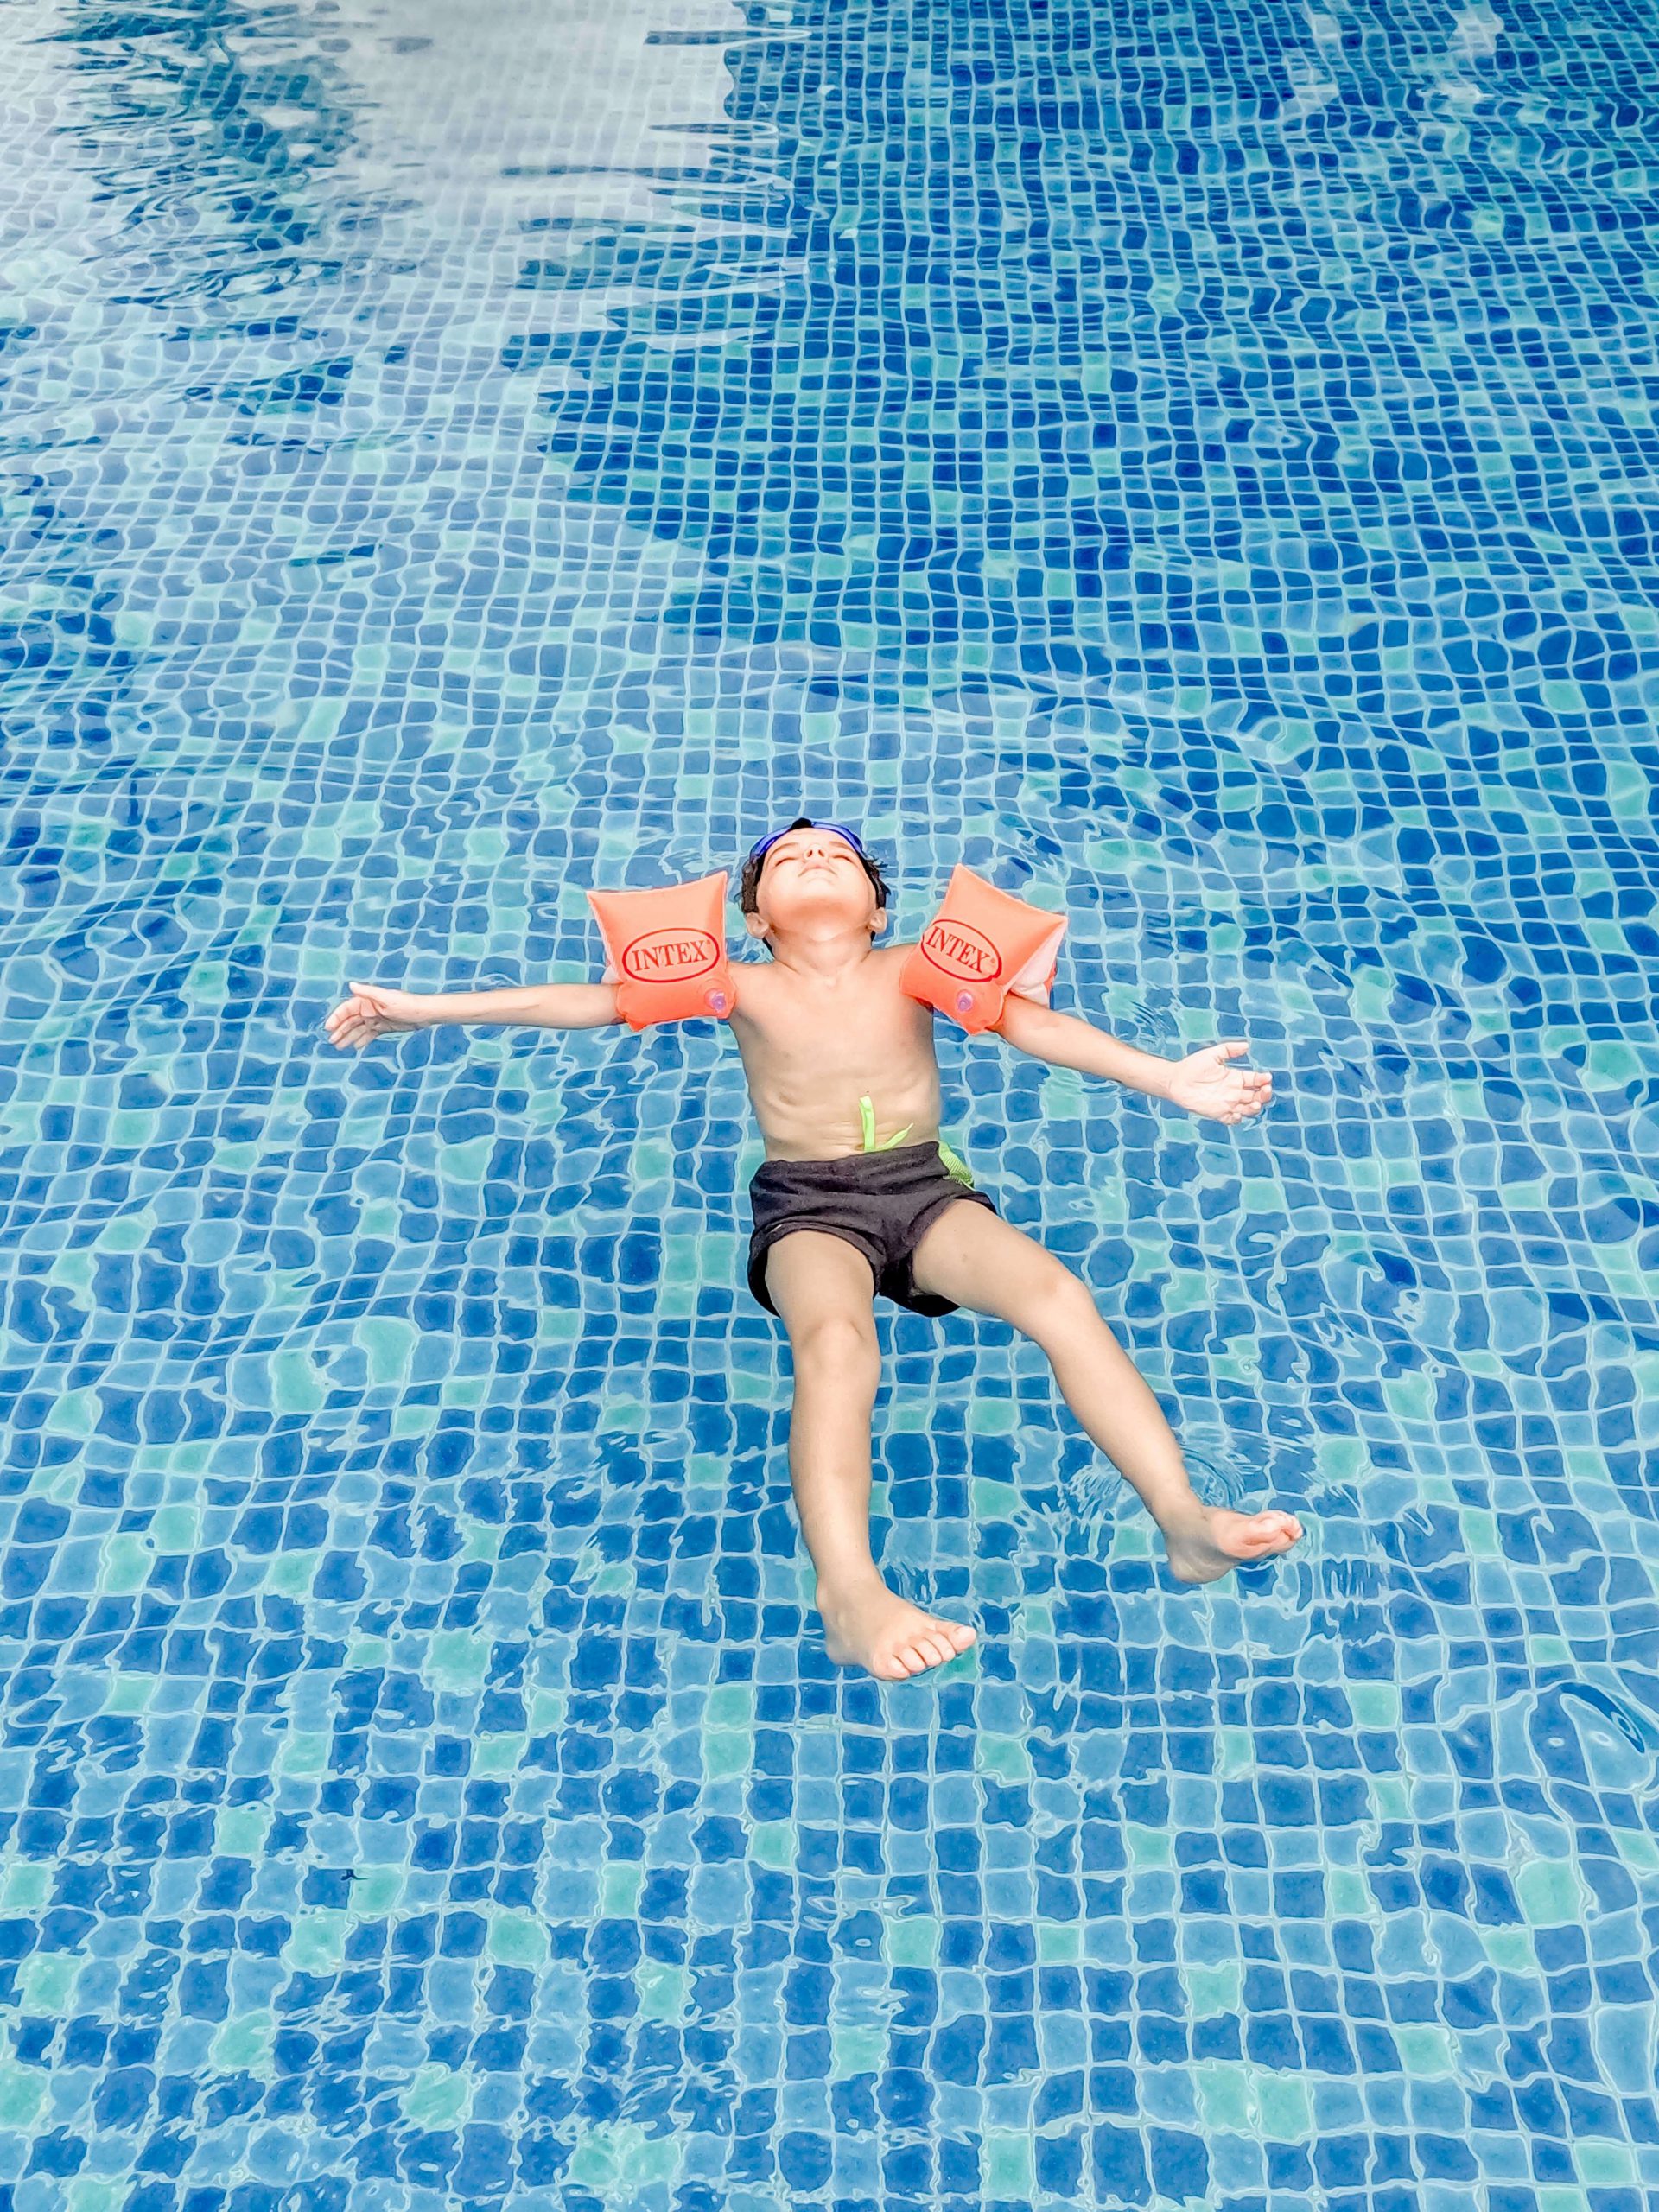 Private Swimming Lessons For Kids Singapore